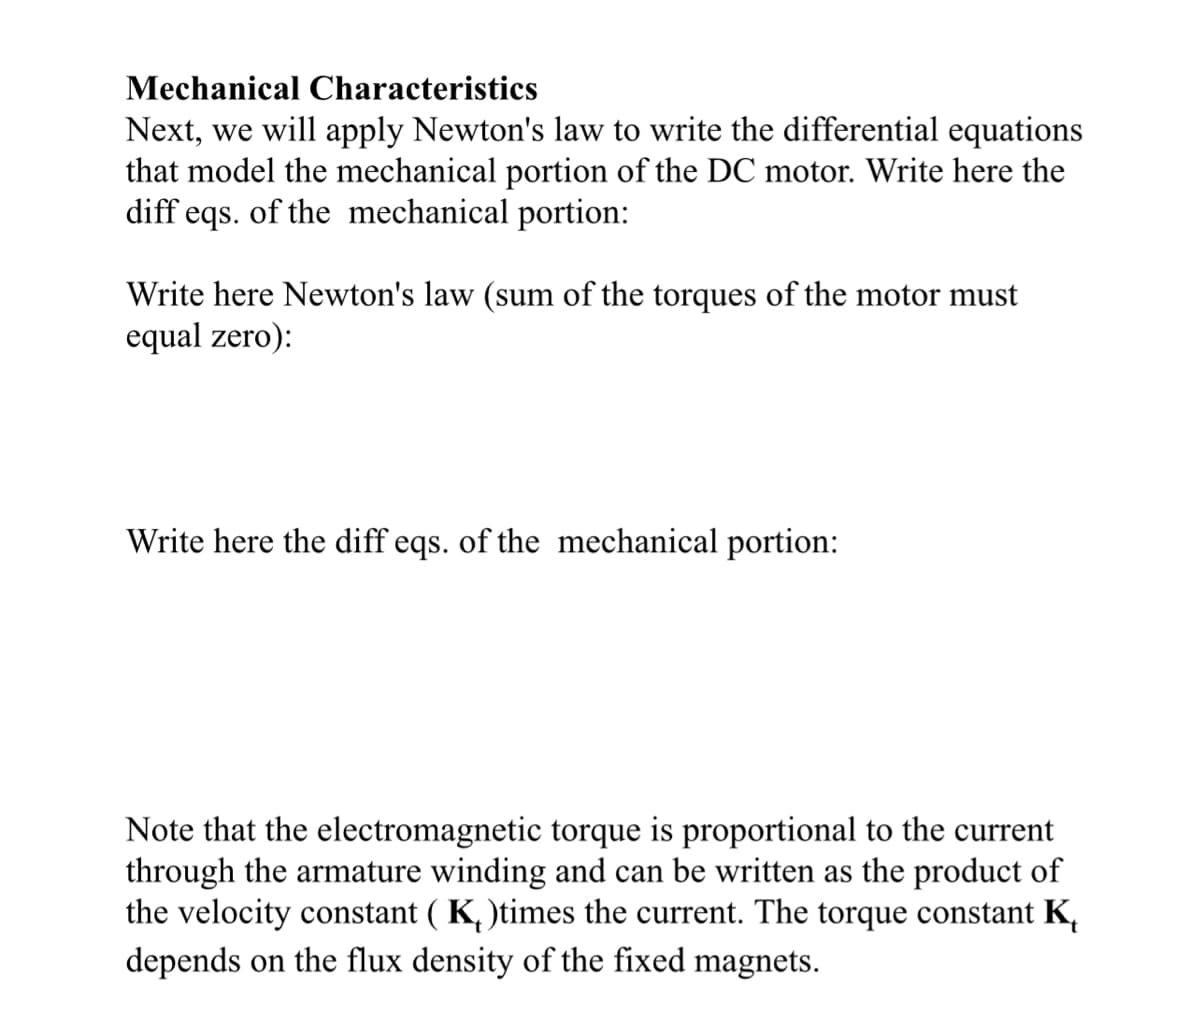 Mechanical Characteristics
Next, we will apply Newton's law to write the differential equations
that model the mechanical portion of the DC motor. Write here the
diff eqs. of the mechanical portion:
Write here Newton's law (sum of the torques of the motor must
equal zero):
Write here the diff eqs. of the mechanical portion:
Note that the electromagnetic torque is proportional to the current
through the armature winding and can be written the product of
the velocity constant (K₂)times the current. The torque constant K
depends on the flux density of the fixed magnets.